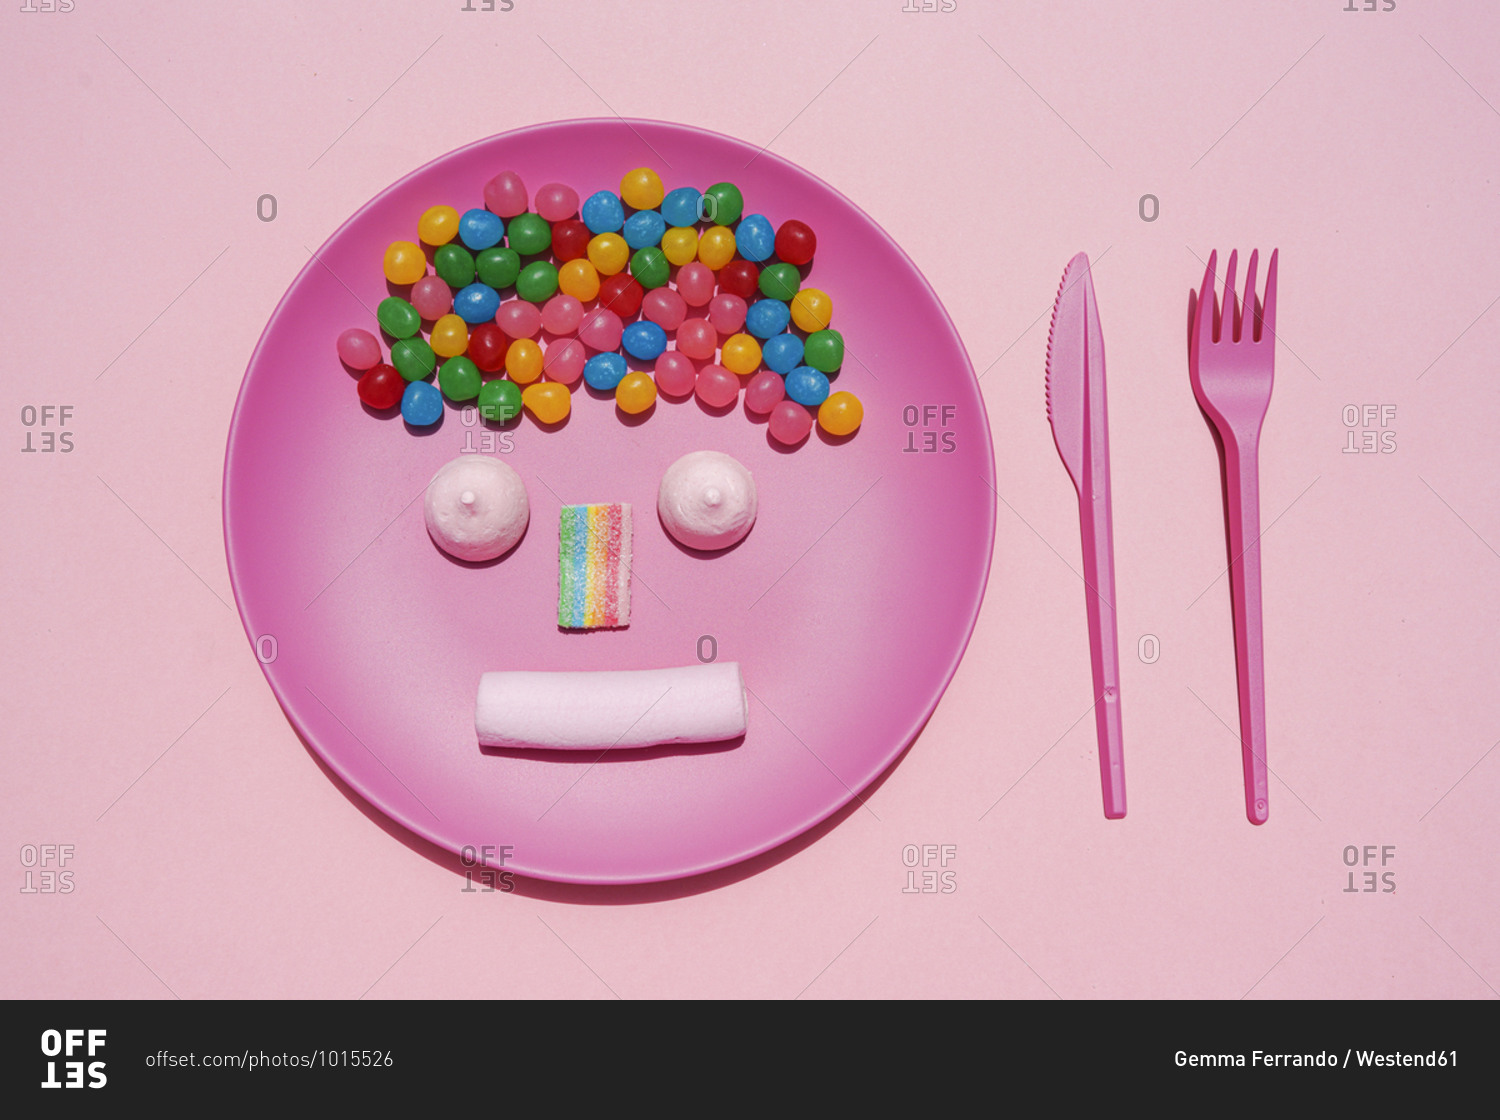 Studio shot of plastic plate with colorful candies and anthropomorphic face made of marshmallows and gum drop